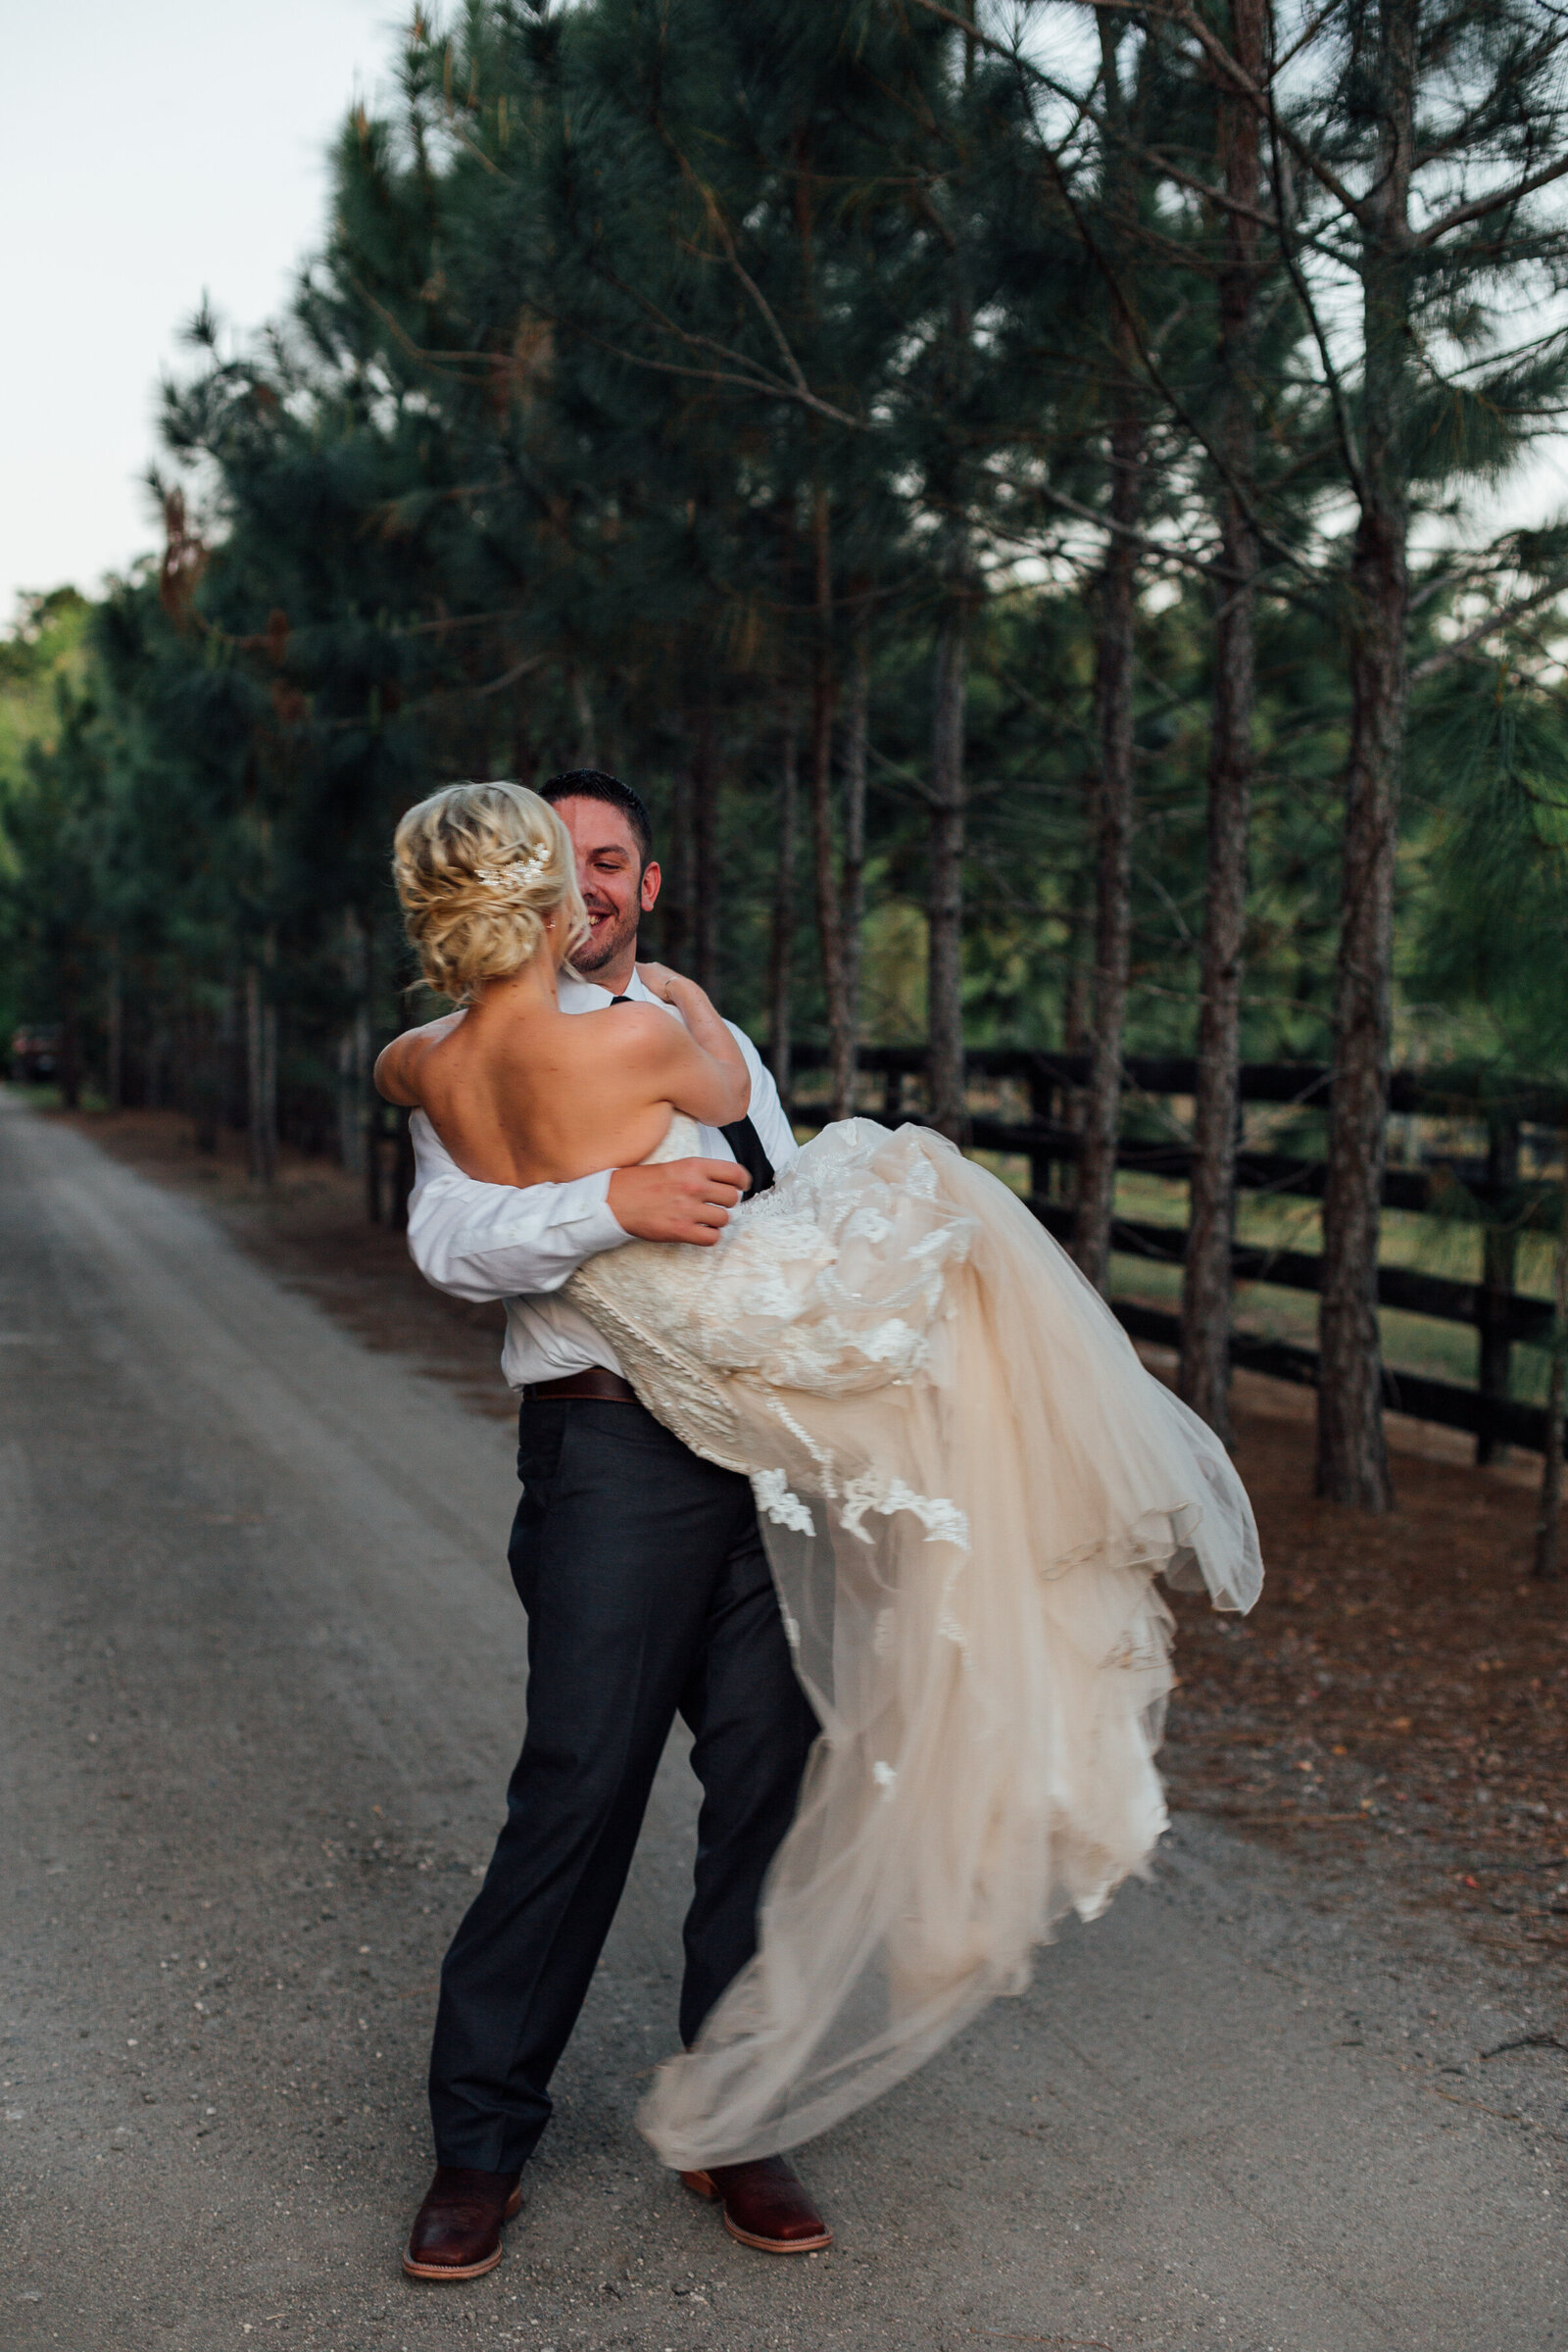 groom-holding-bride-on-country-road-photo-iris-and-urchin-ryley